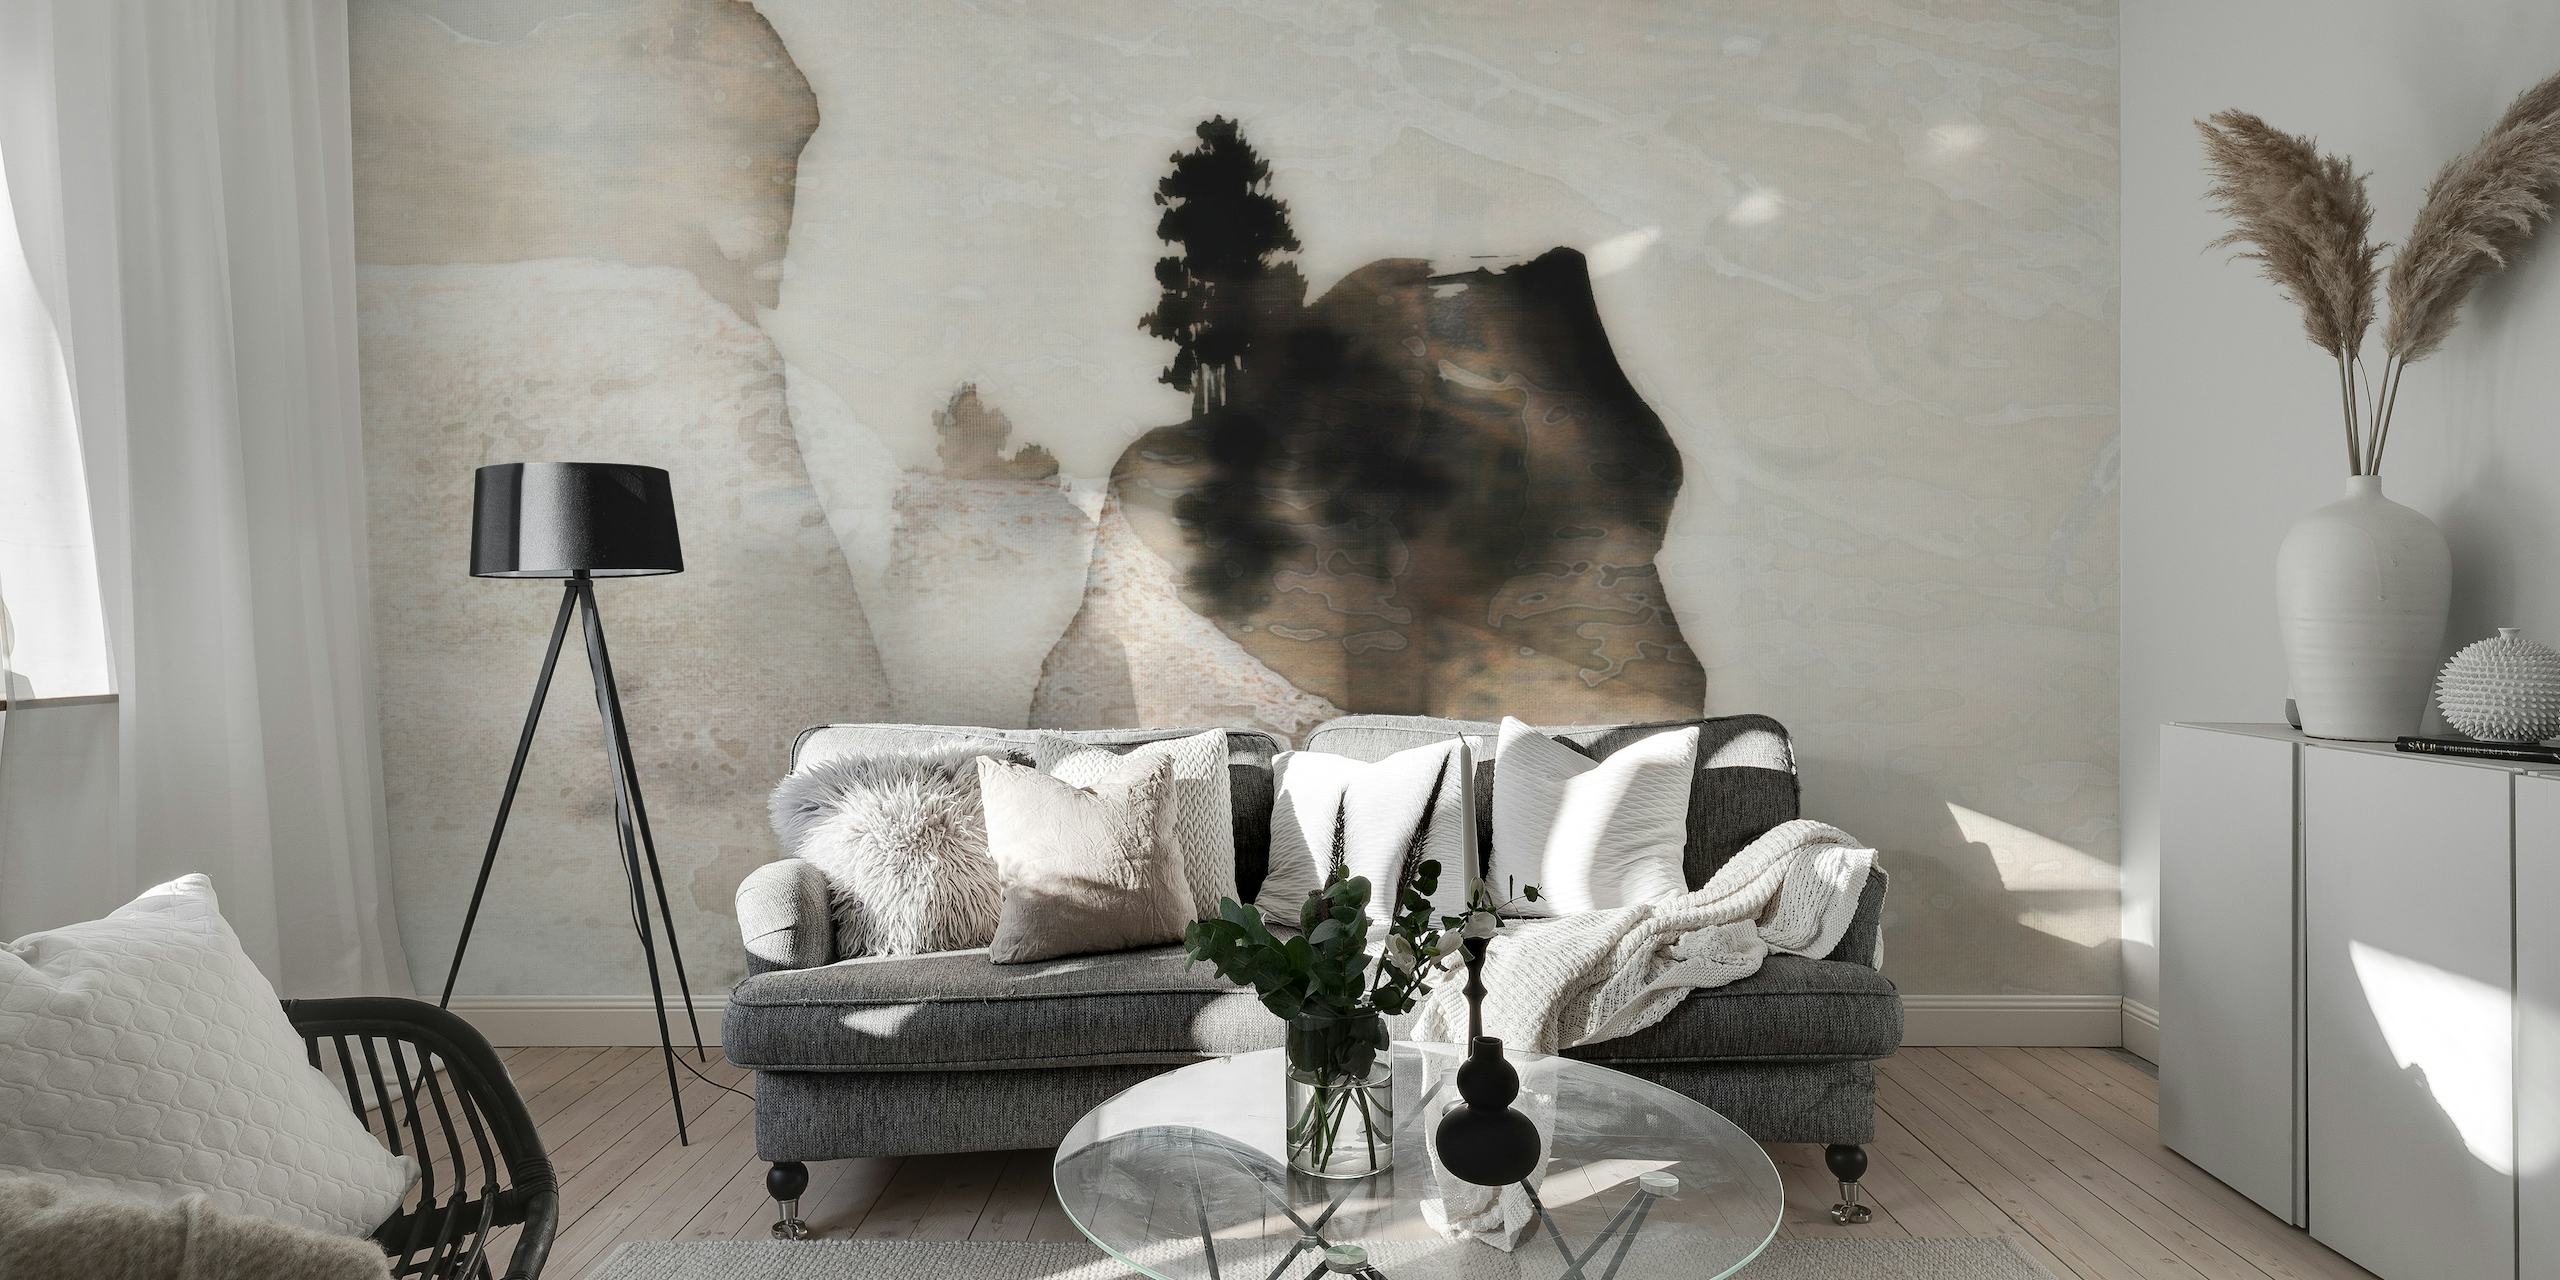 Neutral-toned wall mural depicting a Japanese pine tree in a misty landscape